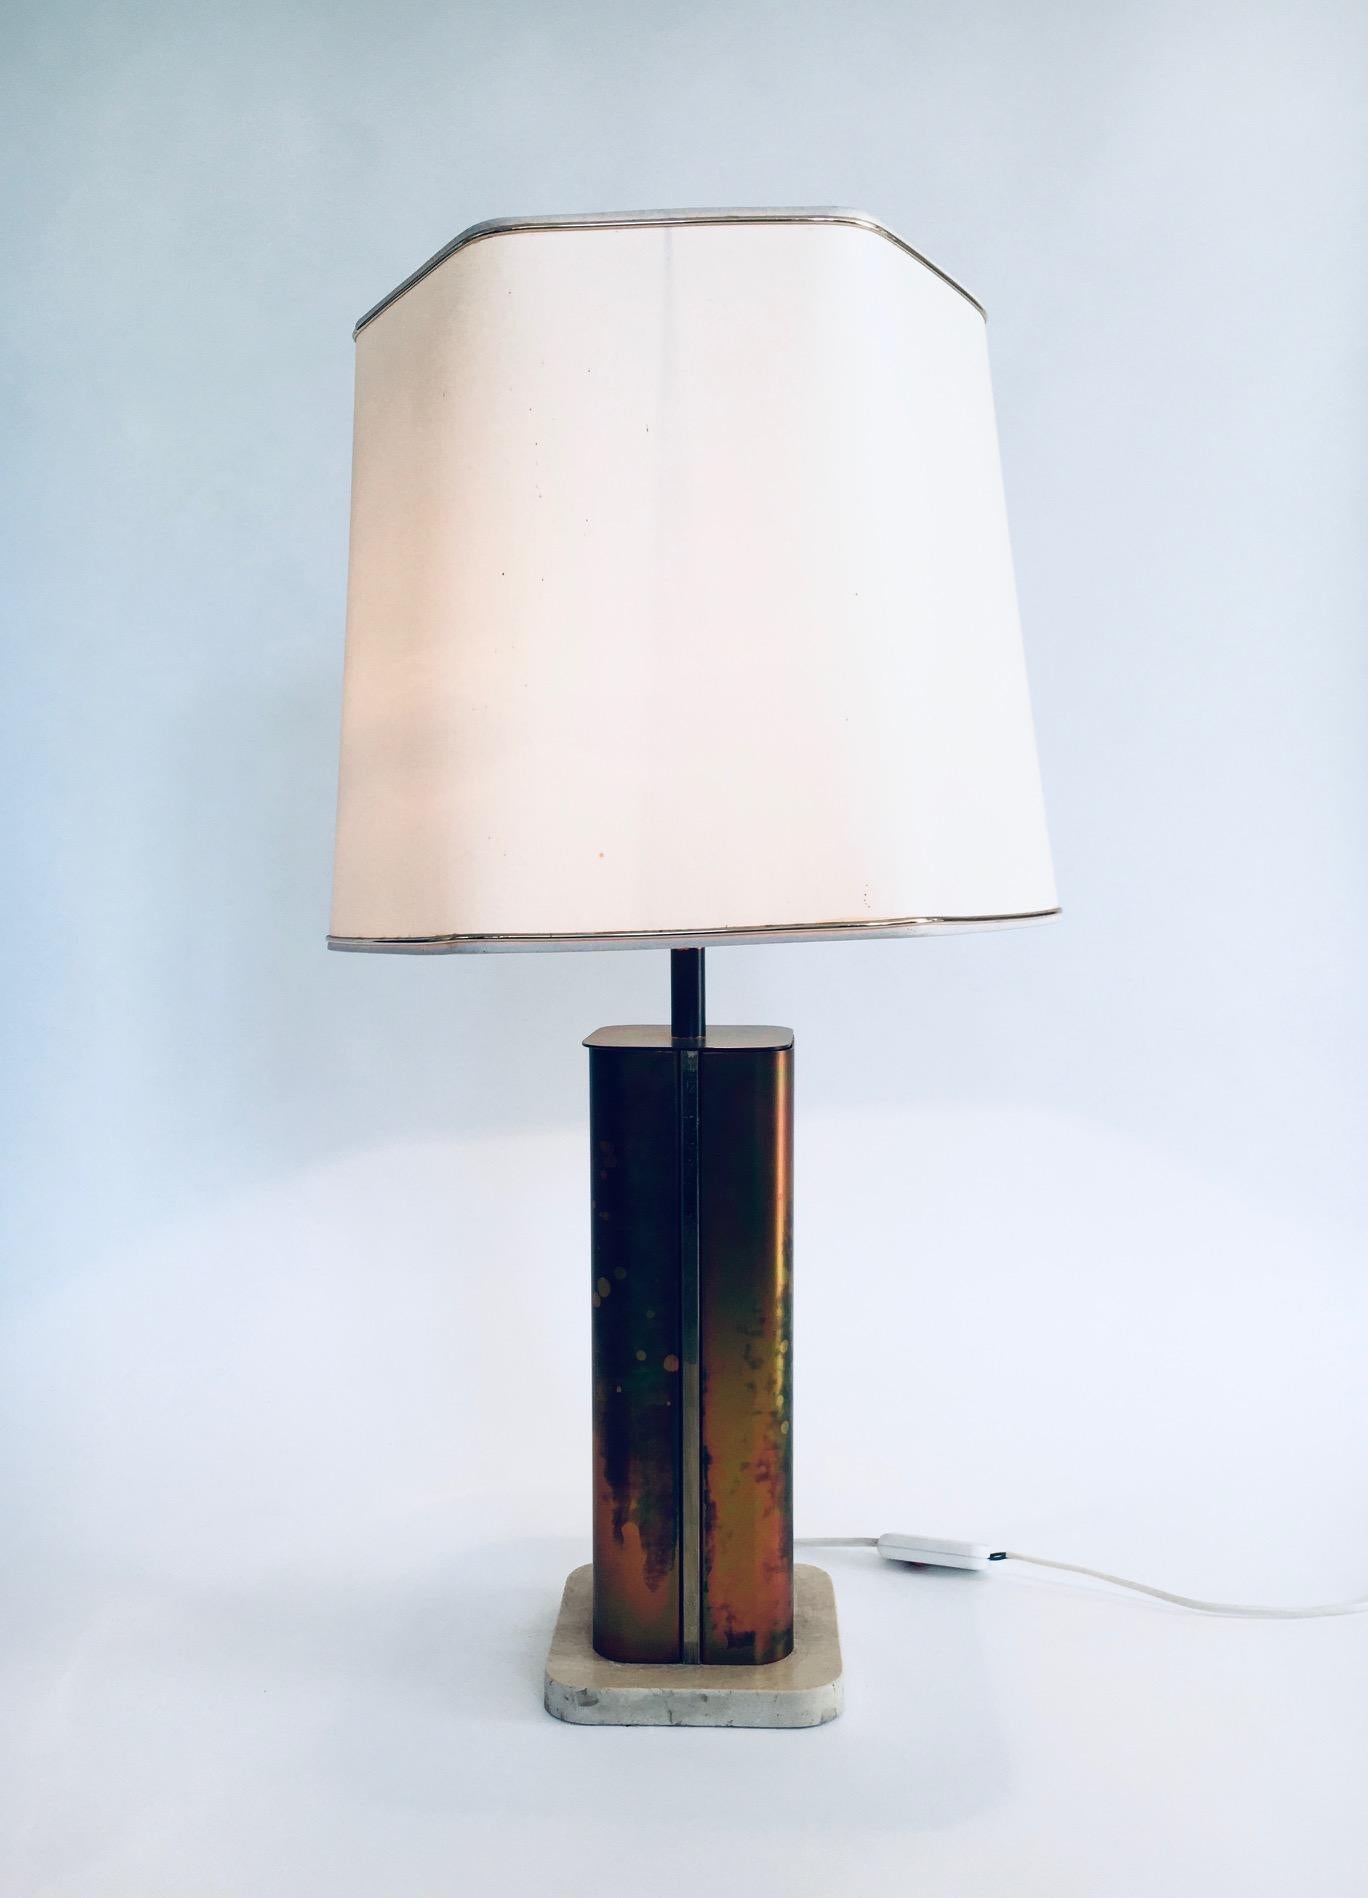 Vintage Hollywood Regency Style Postmodern Design Table Lamp by Fedam, made in the Netherlands 1970's. This table lamp is made of brass, oxidized brass and travertine marble base with a hexagonal lampshade. The lampshade is not original to the lamp